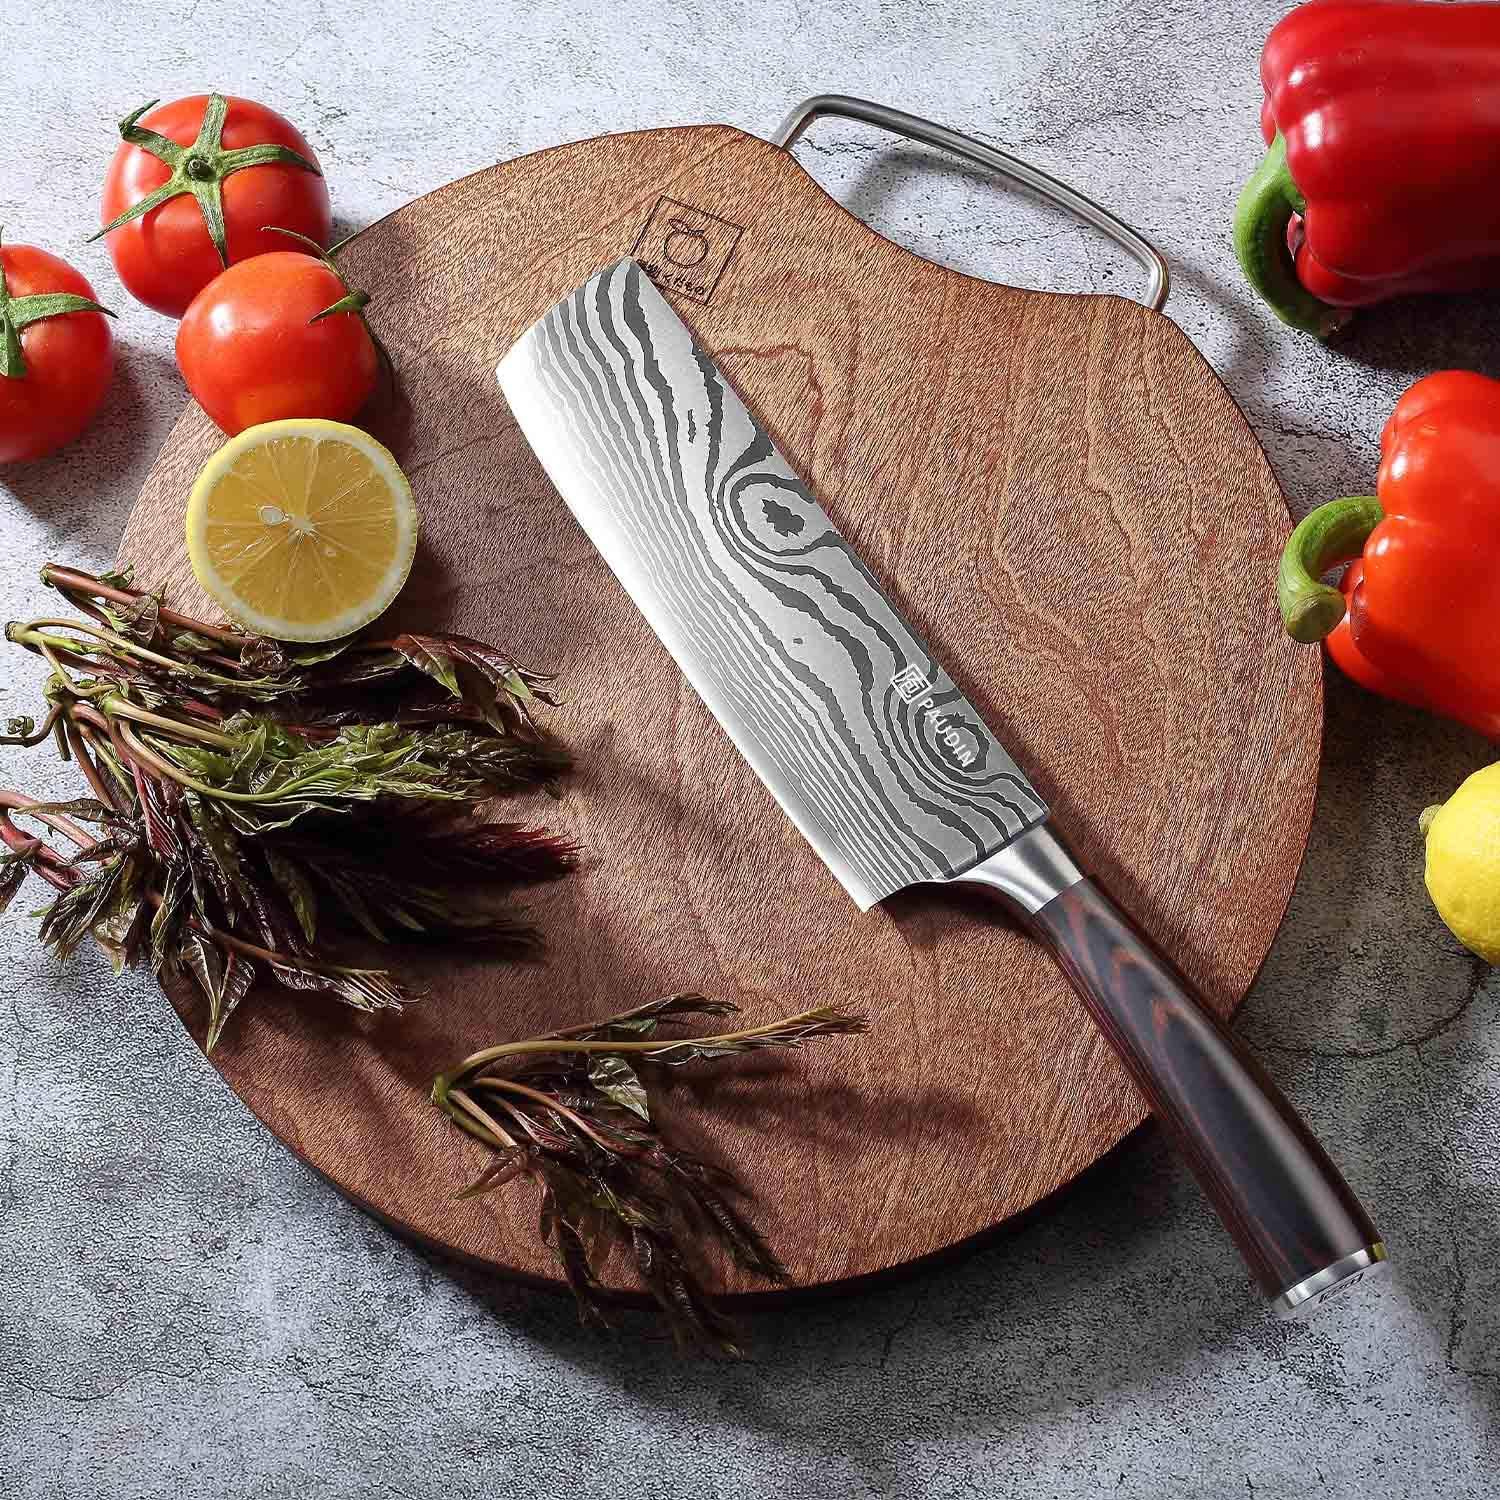 Nakiri Knife - 7" Razor Sharp Meat Cleaver and Vegetable Kitchen Knife, High Carbon Stainless Steel, Multipurpose Asian Chef Knife for Home and Kitchen with Ergonomic Handle